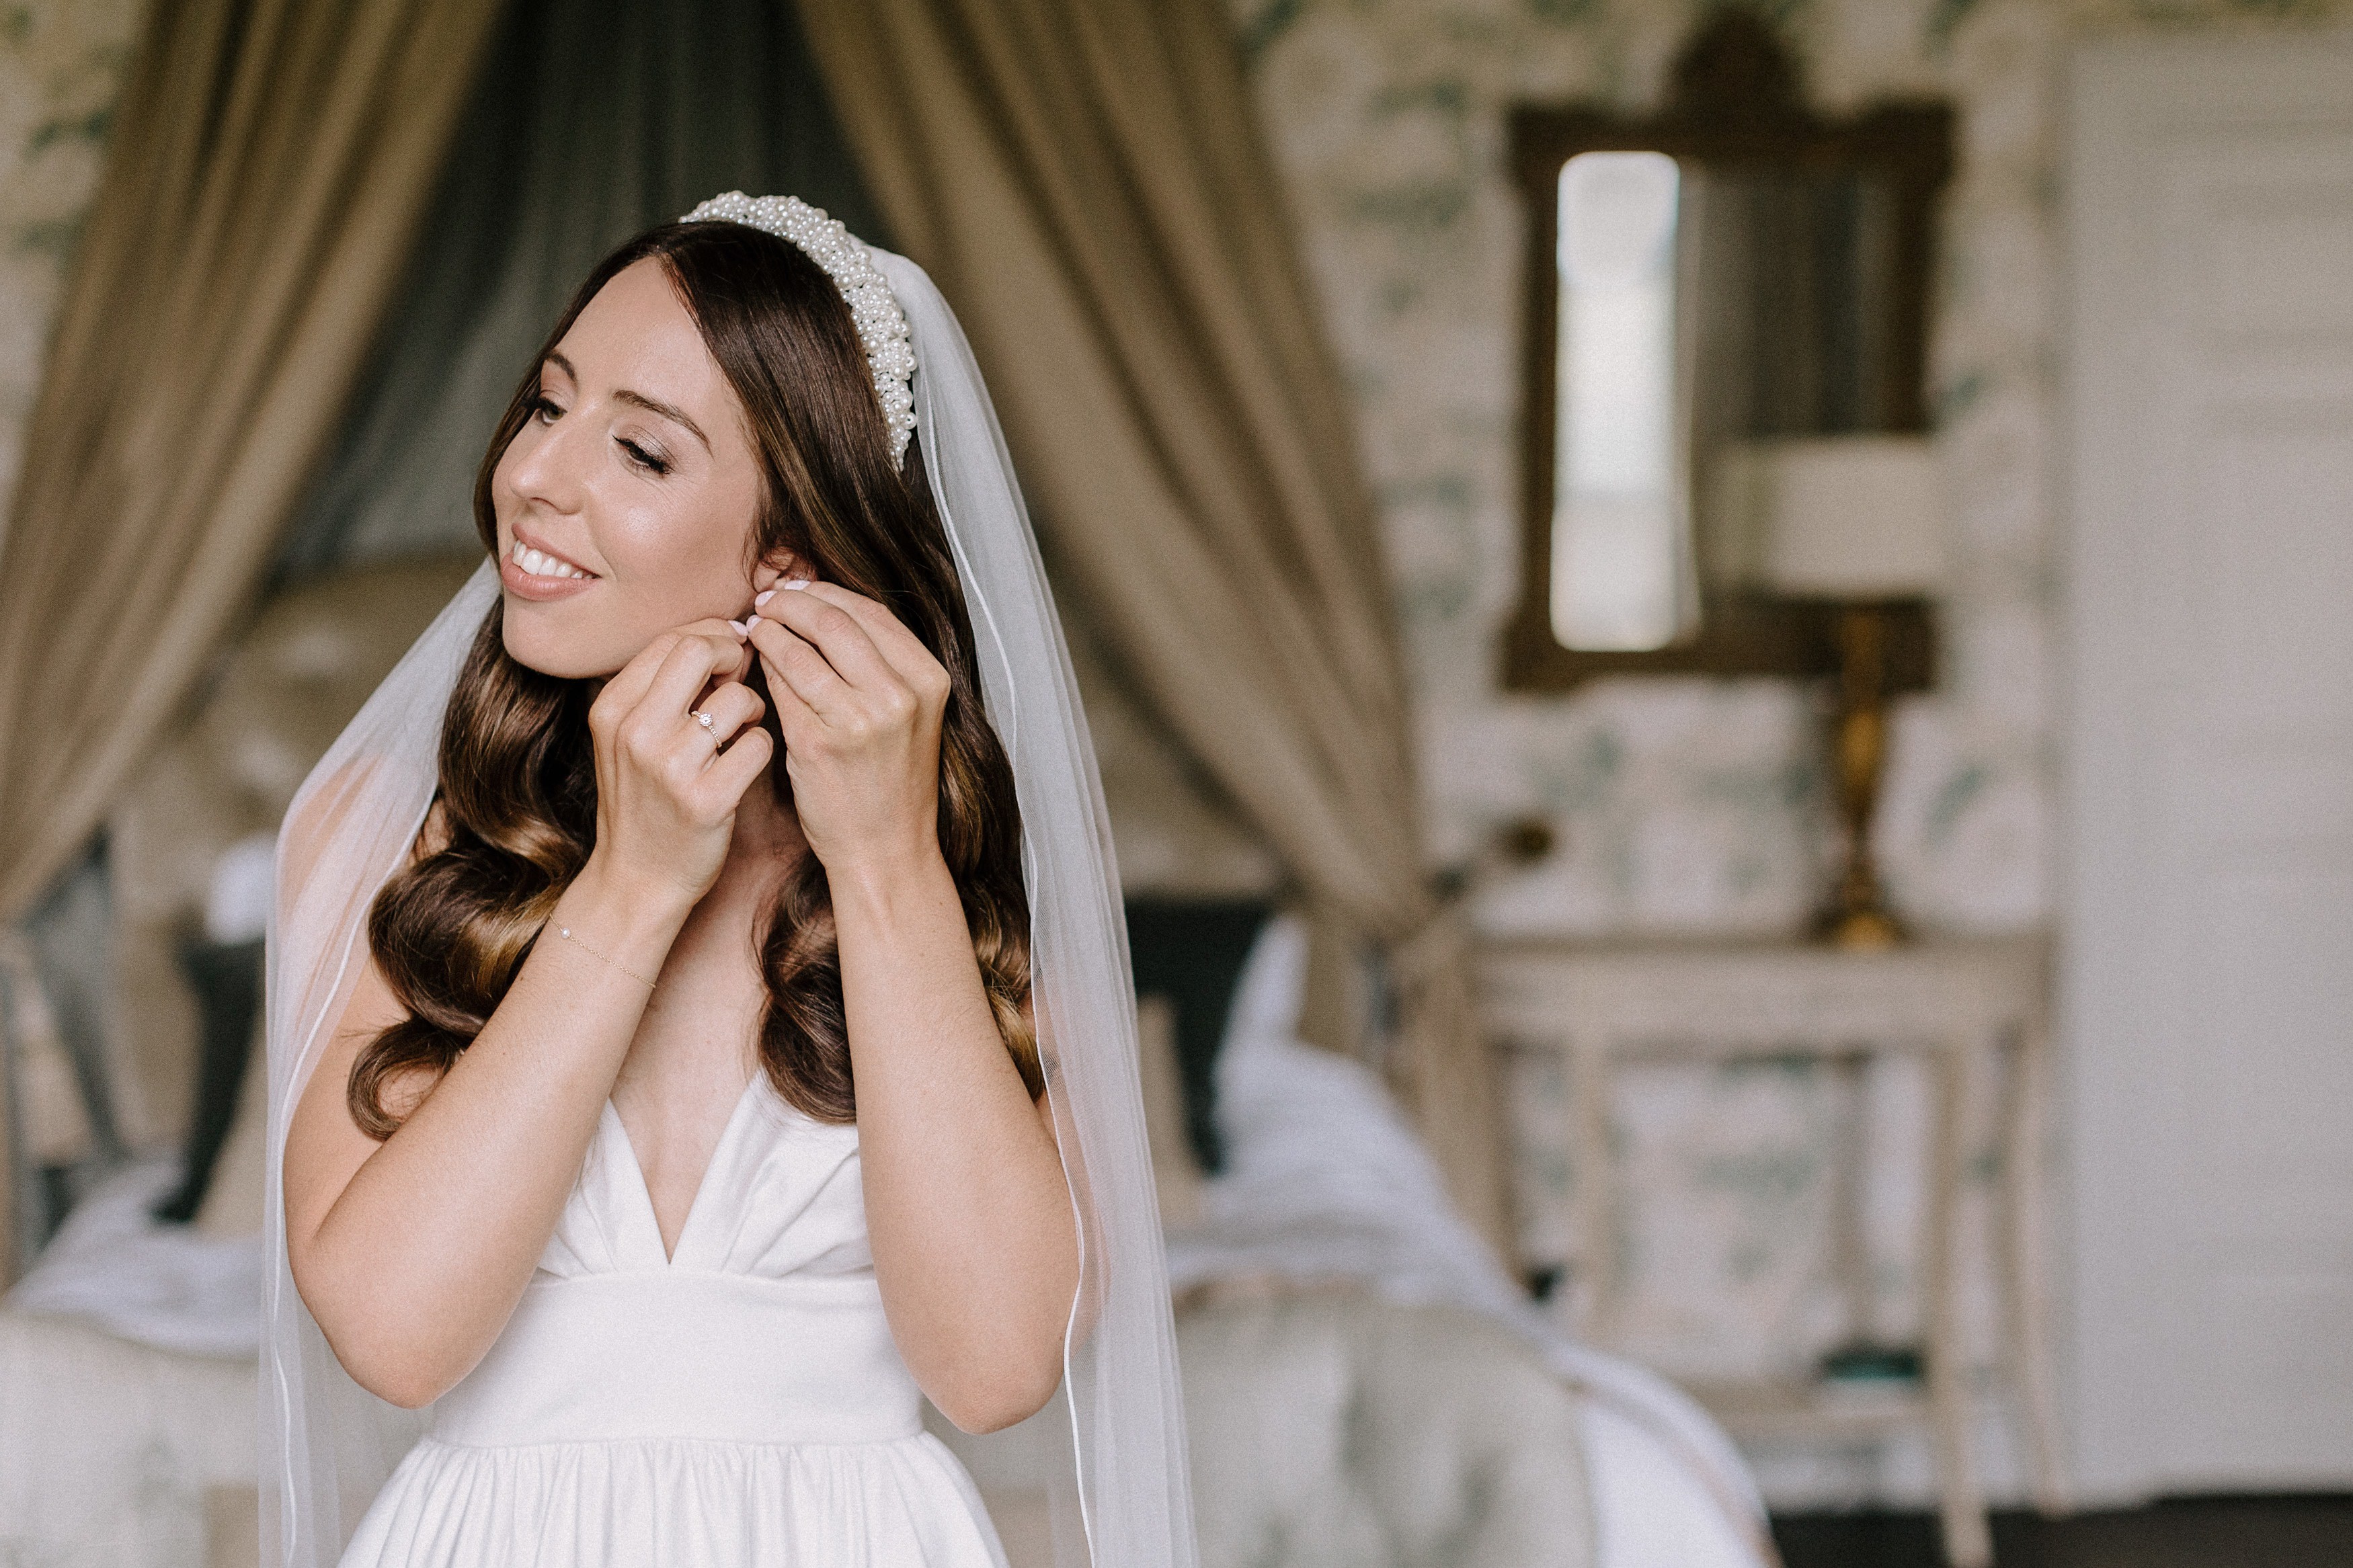 Bride in her wedding dress and veil putting in her wedding day earrings